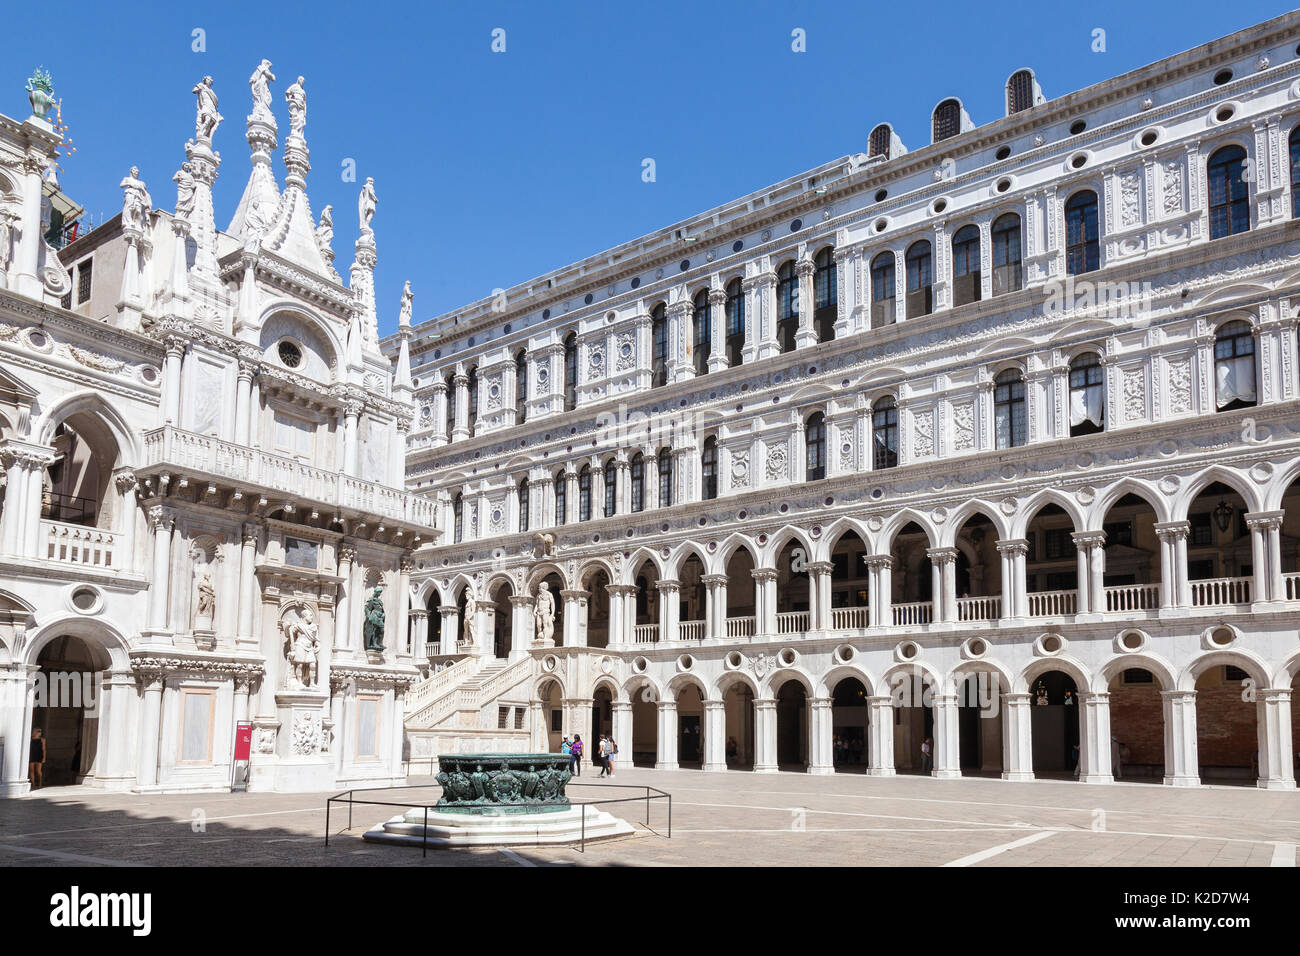 Inner coutryard of the Doges Palace or Palazzo Ducale Venice, Veneto, Italy which was the site of the governmnet of the Venetian Republic. It is built Stock Photo